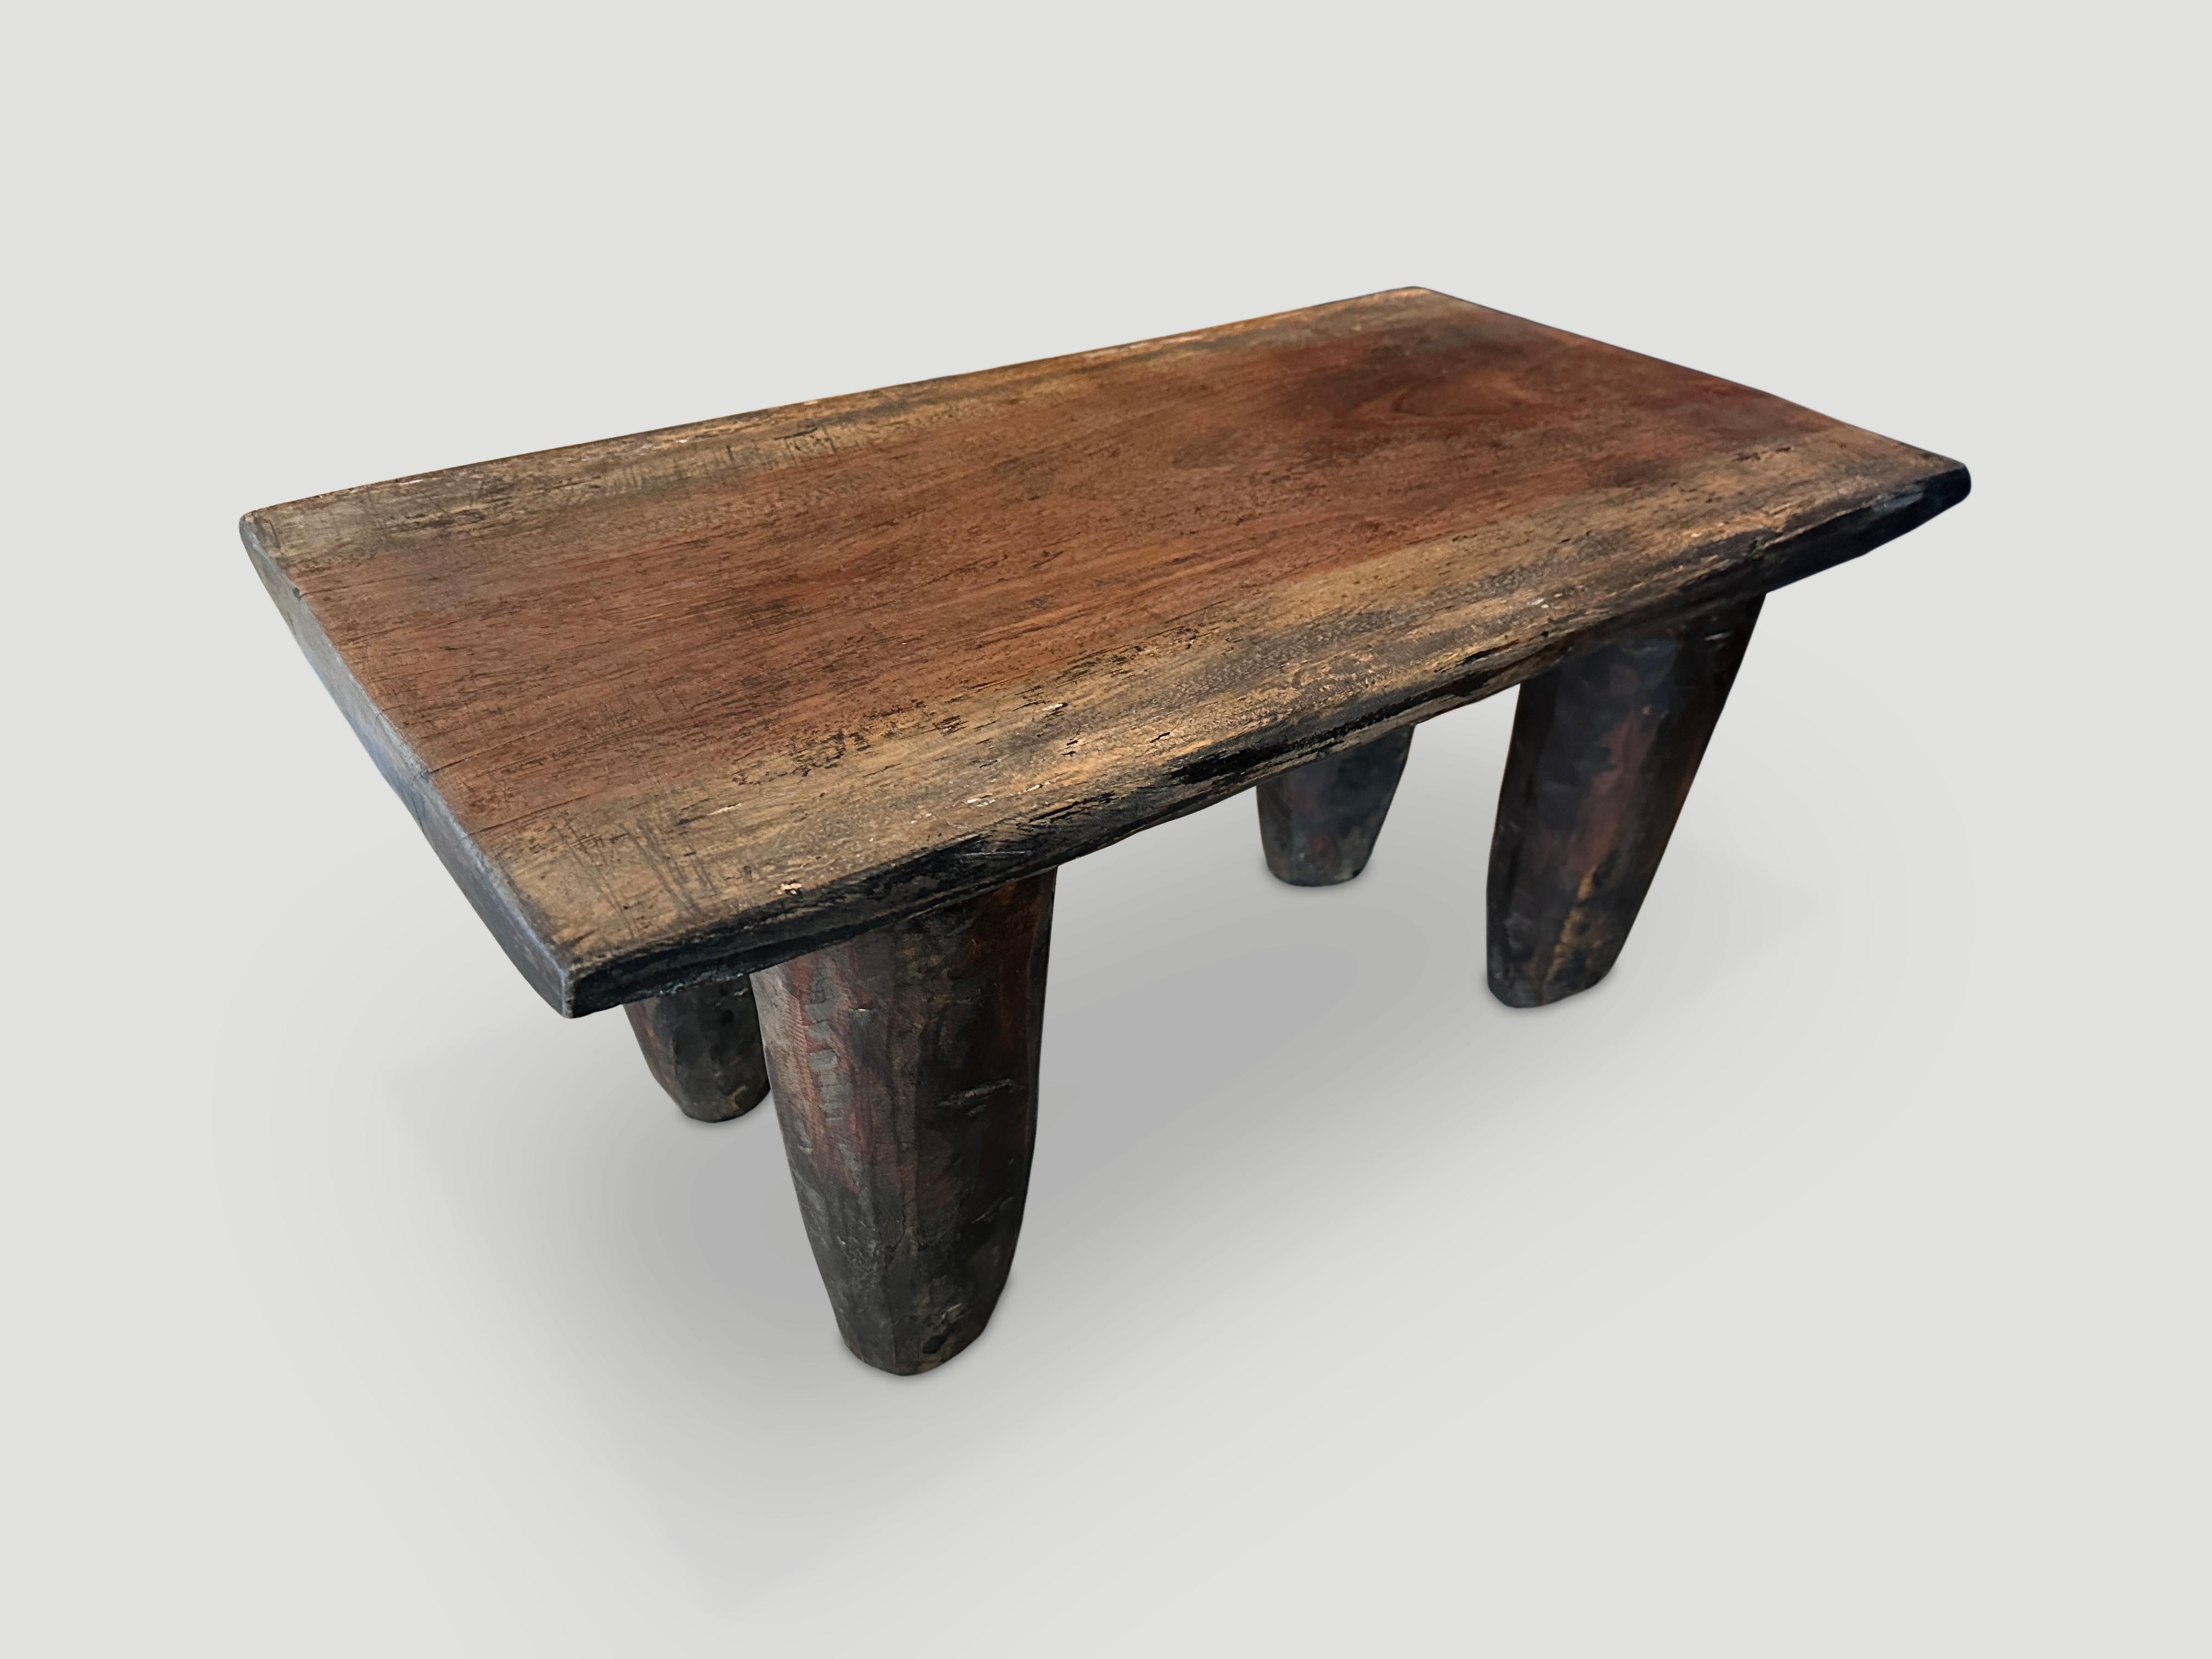 Tribal Andrianna Shamaris Antique African Senufo Coffee Table or Bench